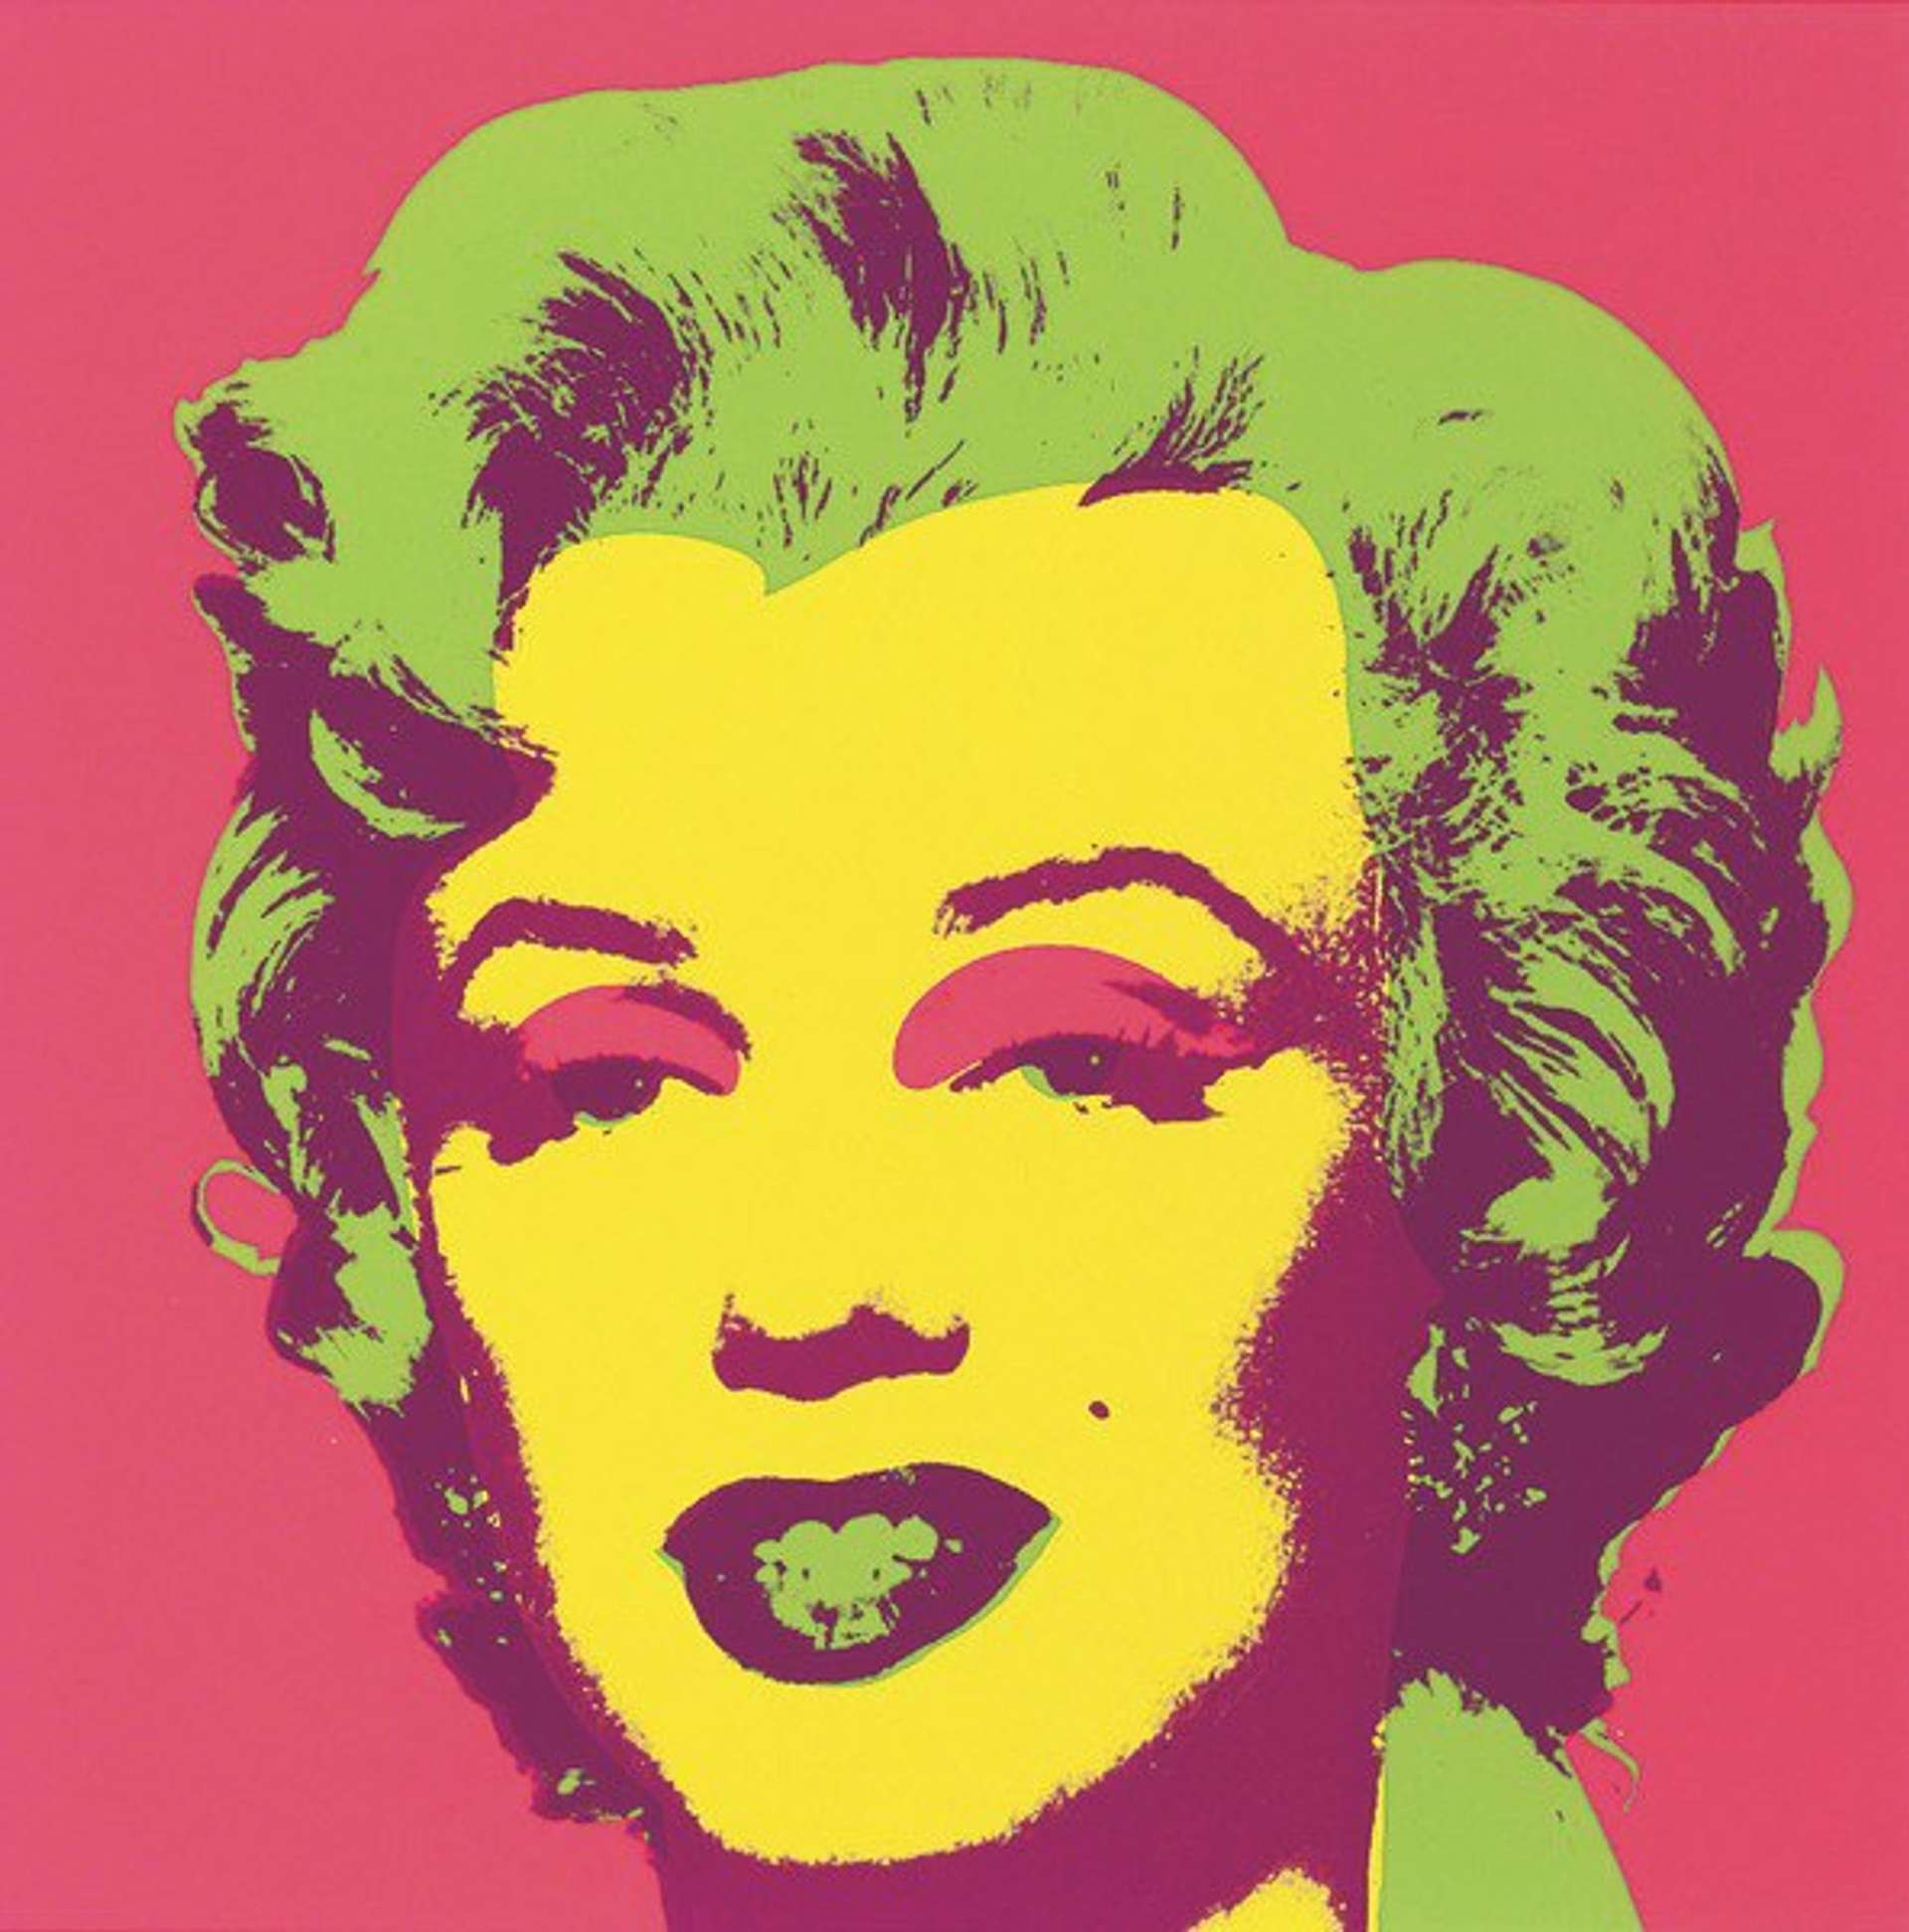 10 Facts About Warhol's Marilyn Monroe